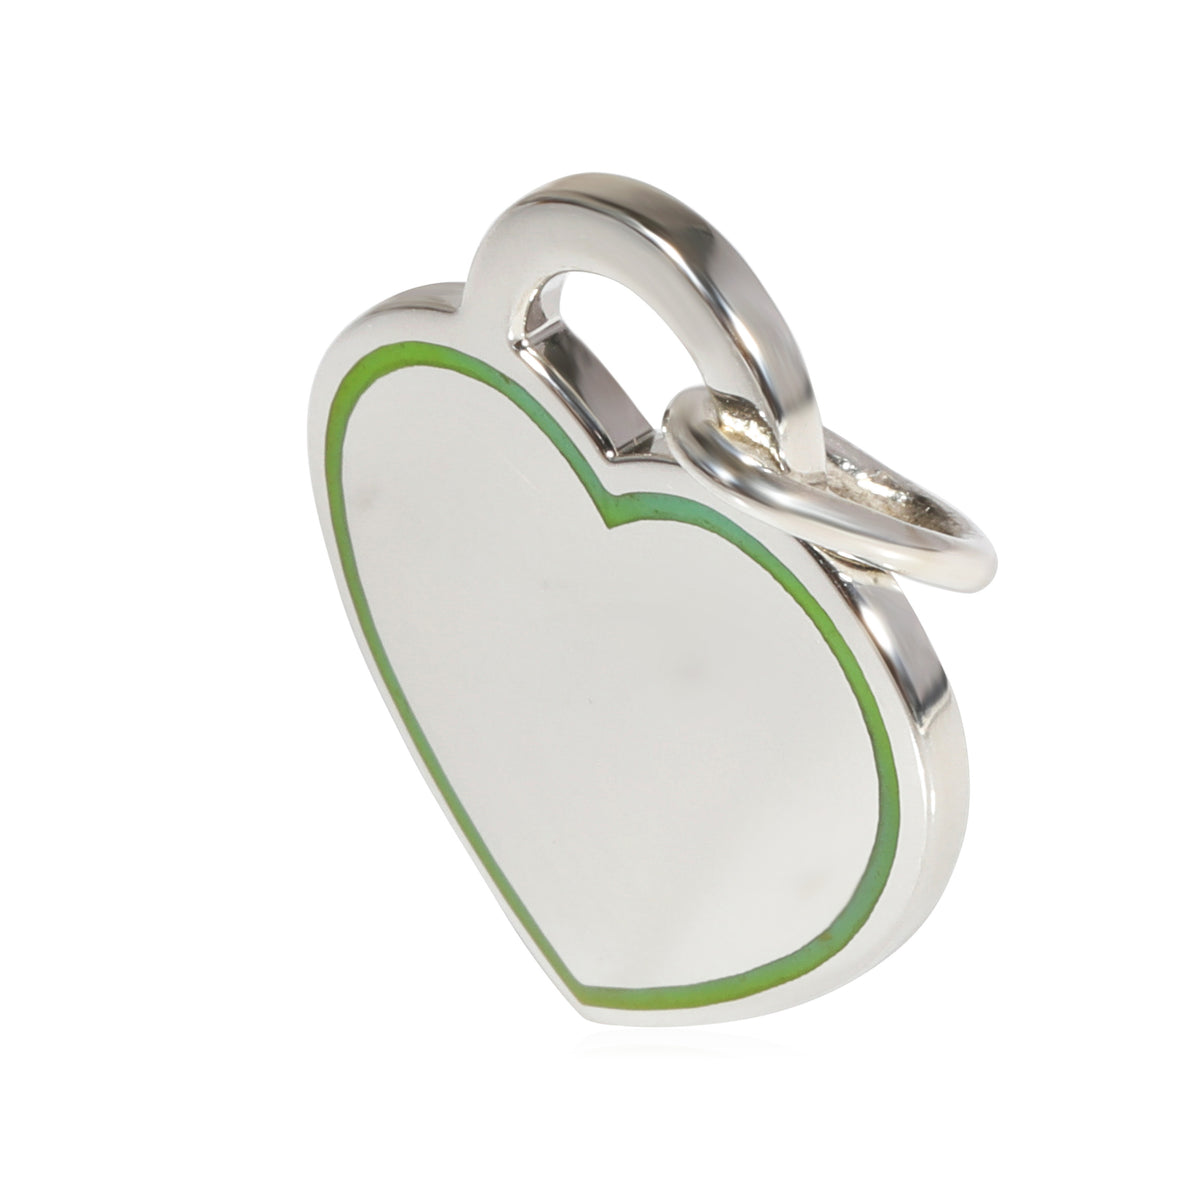 Tiffany & Co. Heart Charm With Blue Enamel Border in Sterling Silver